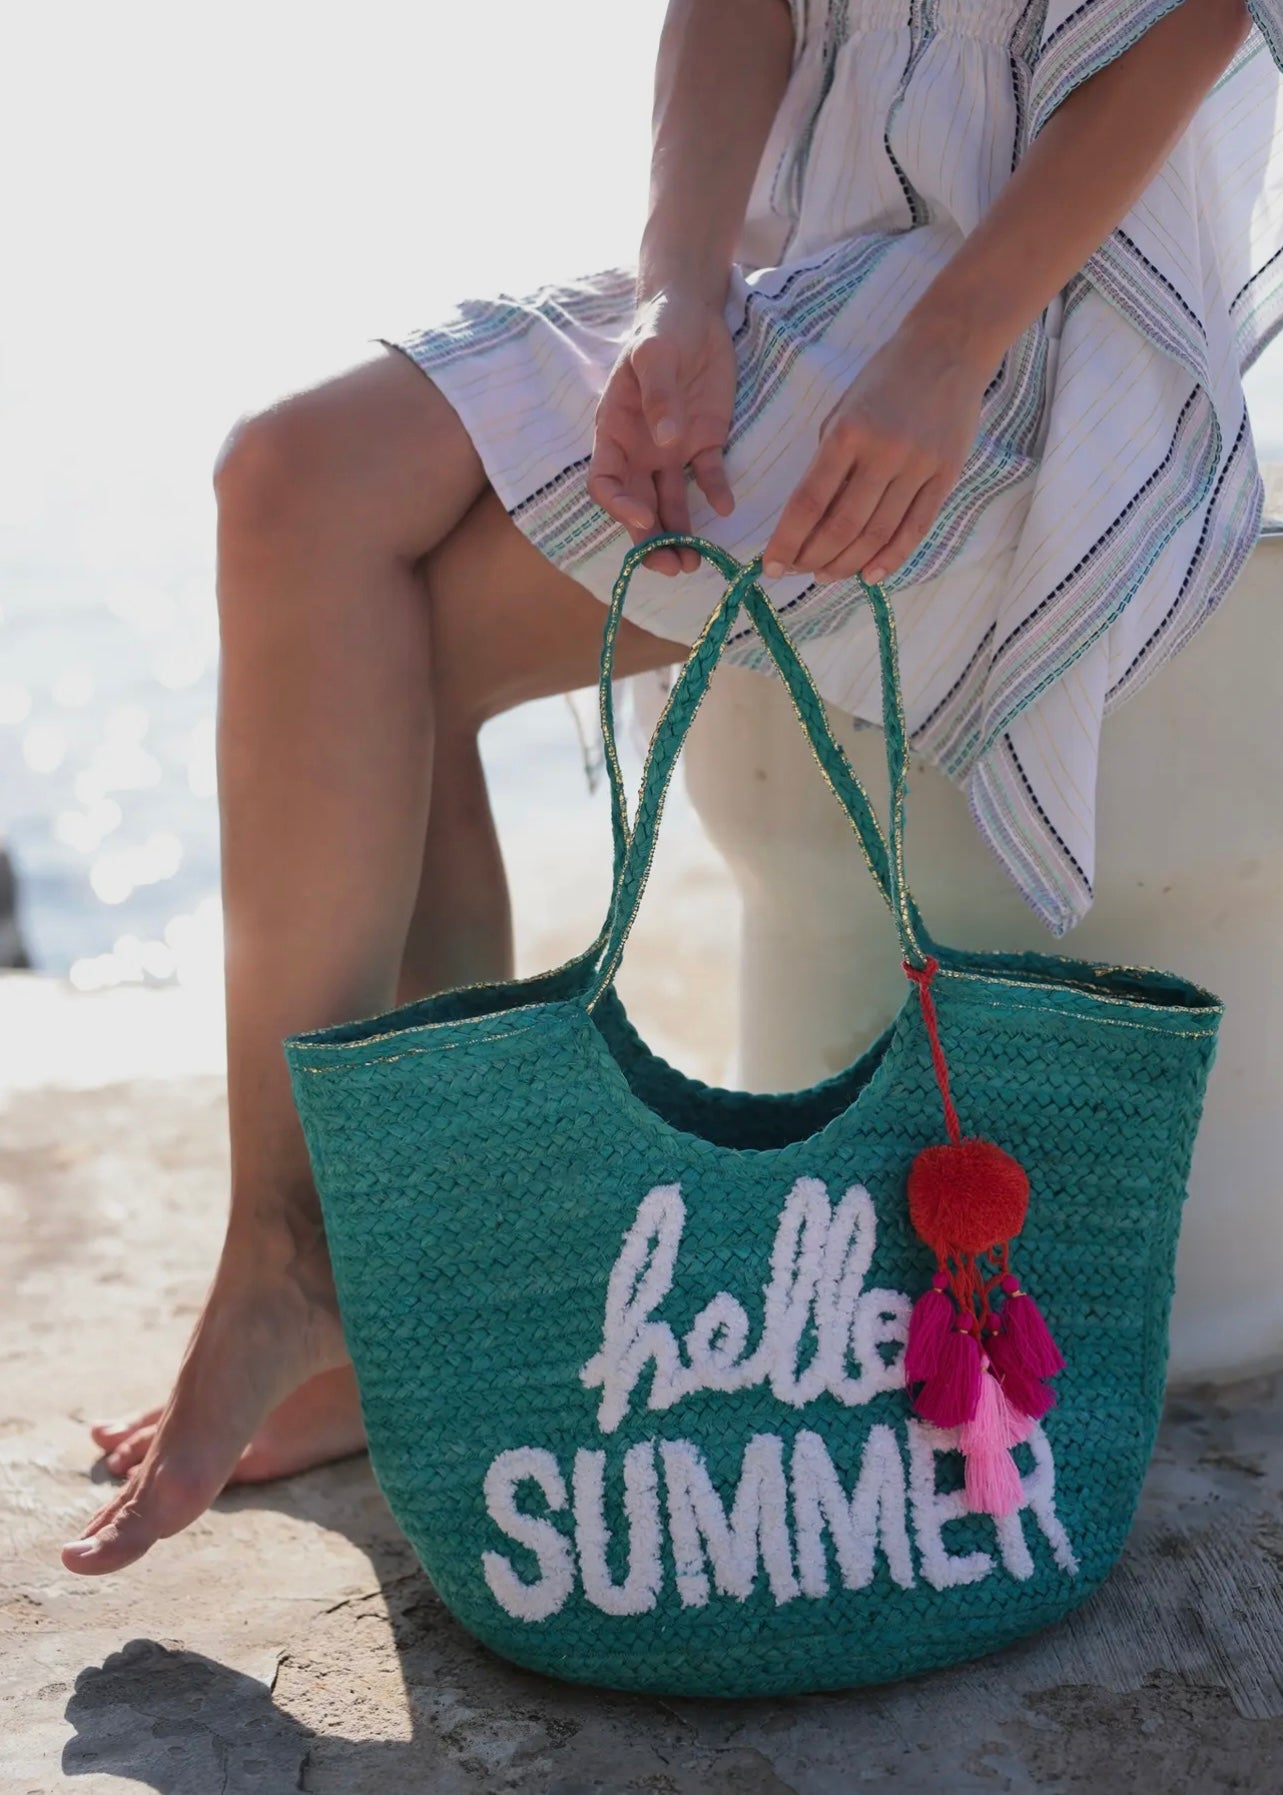 Hello Summer Tote, Turquoise